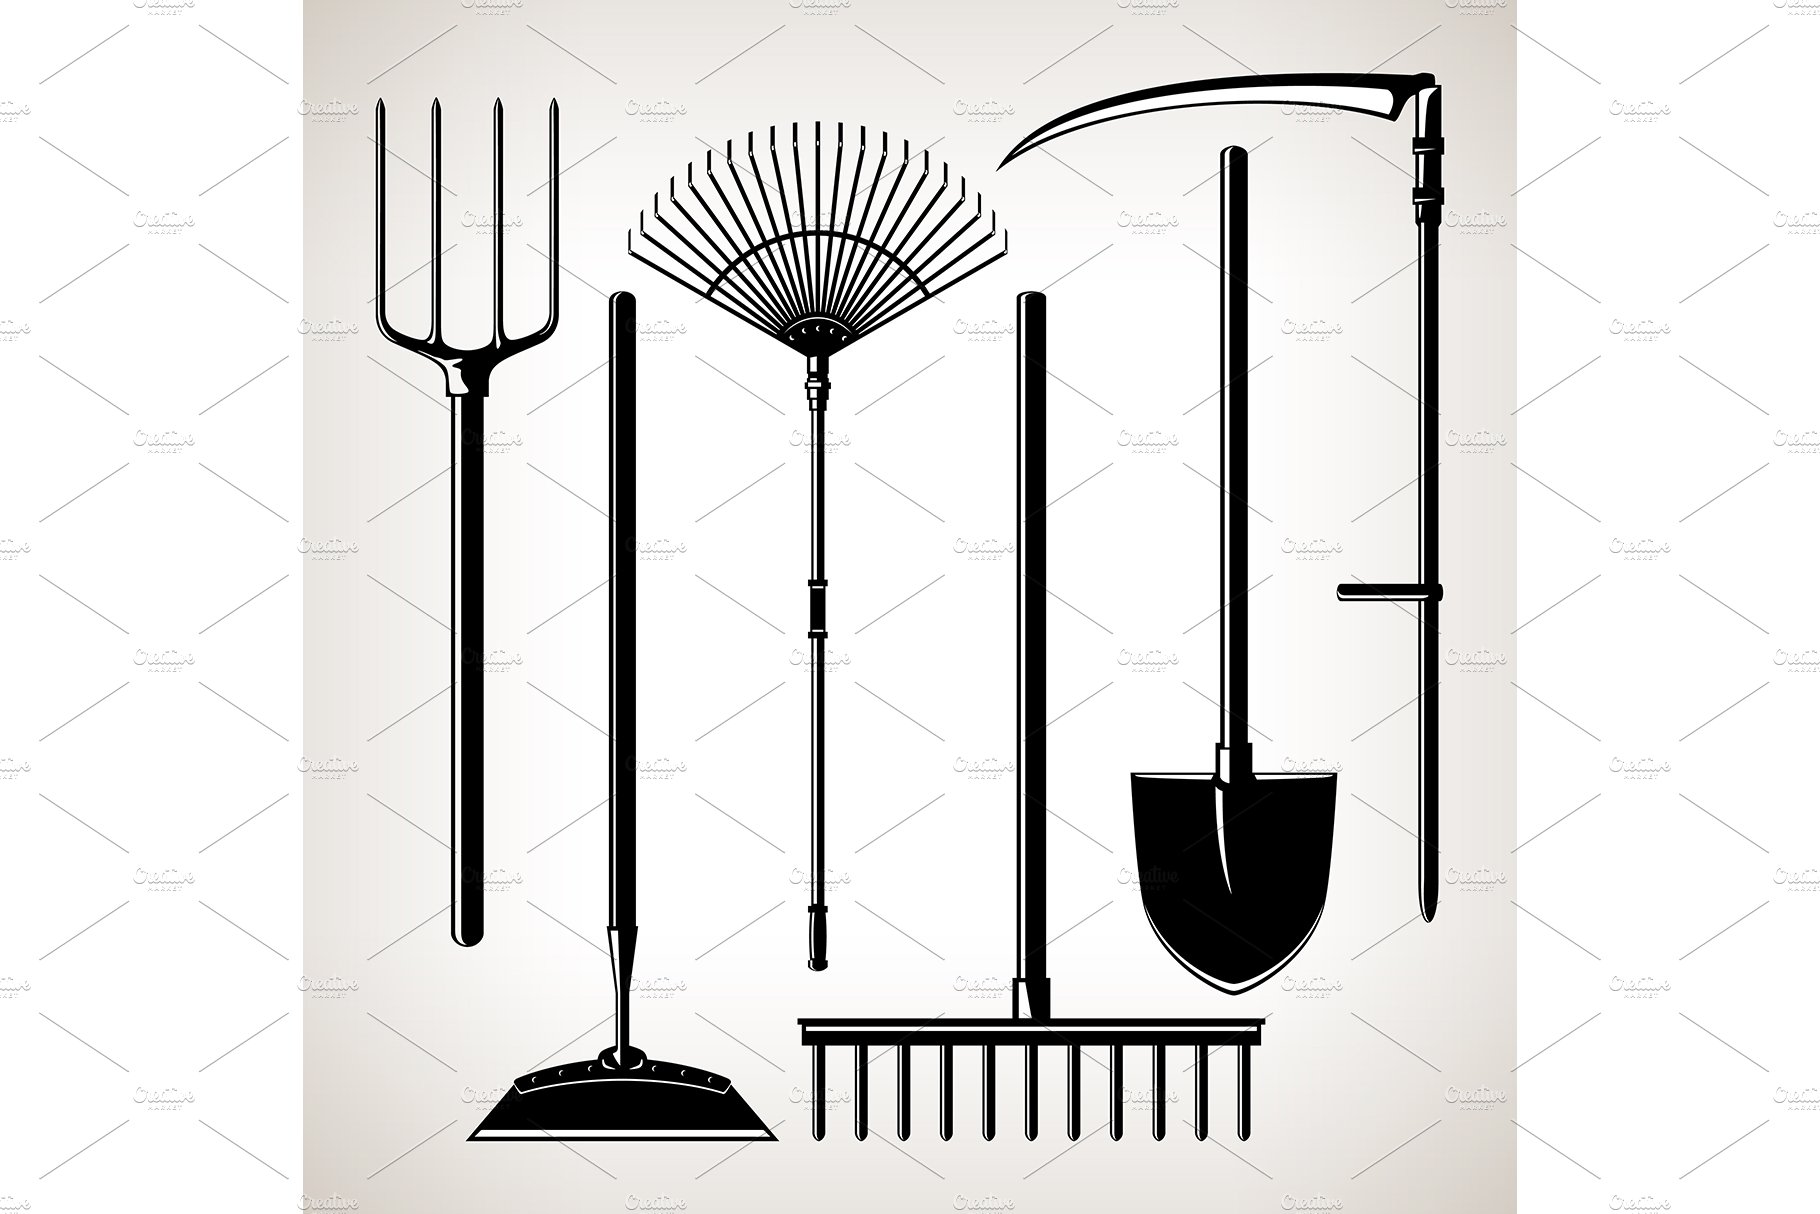 Set of agricultural tools cover image.